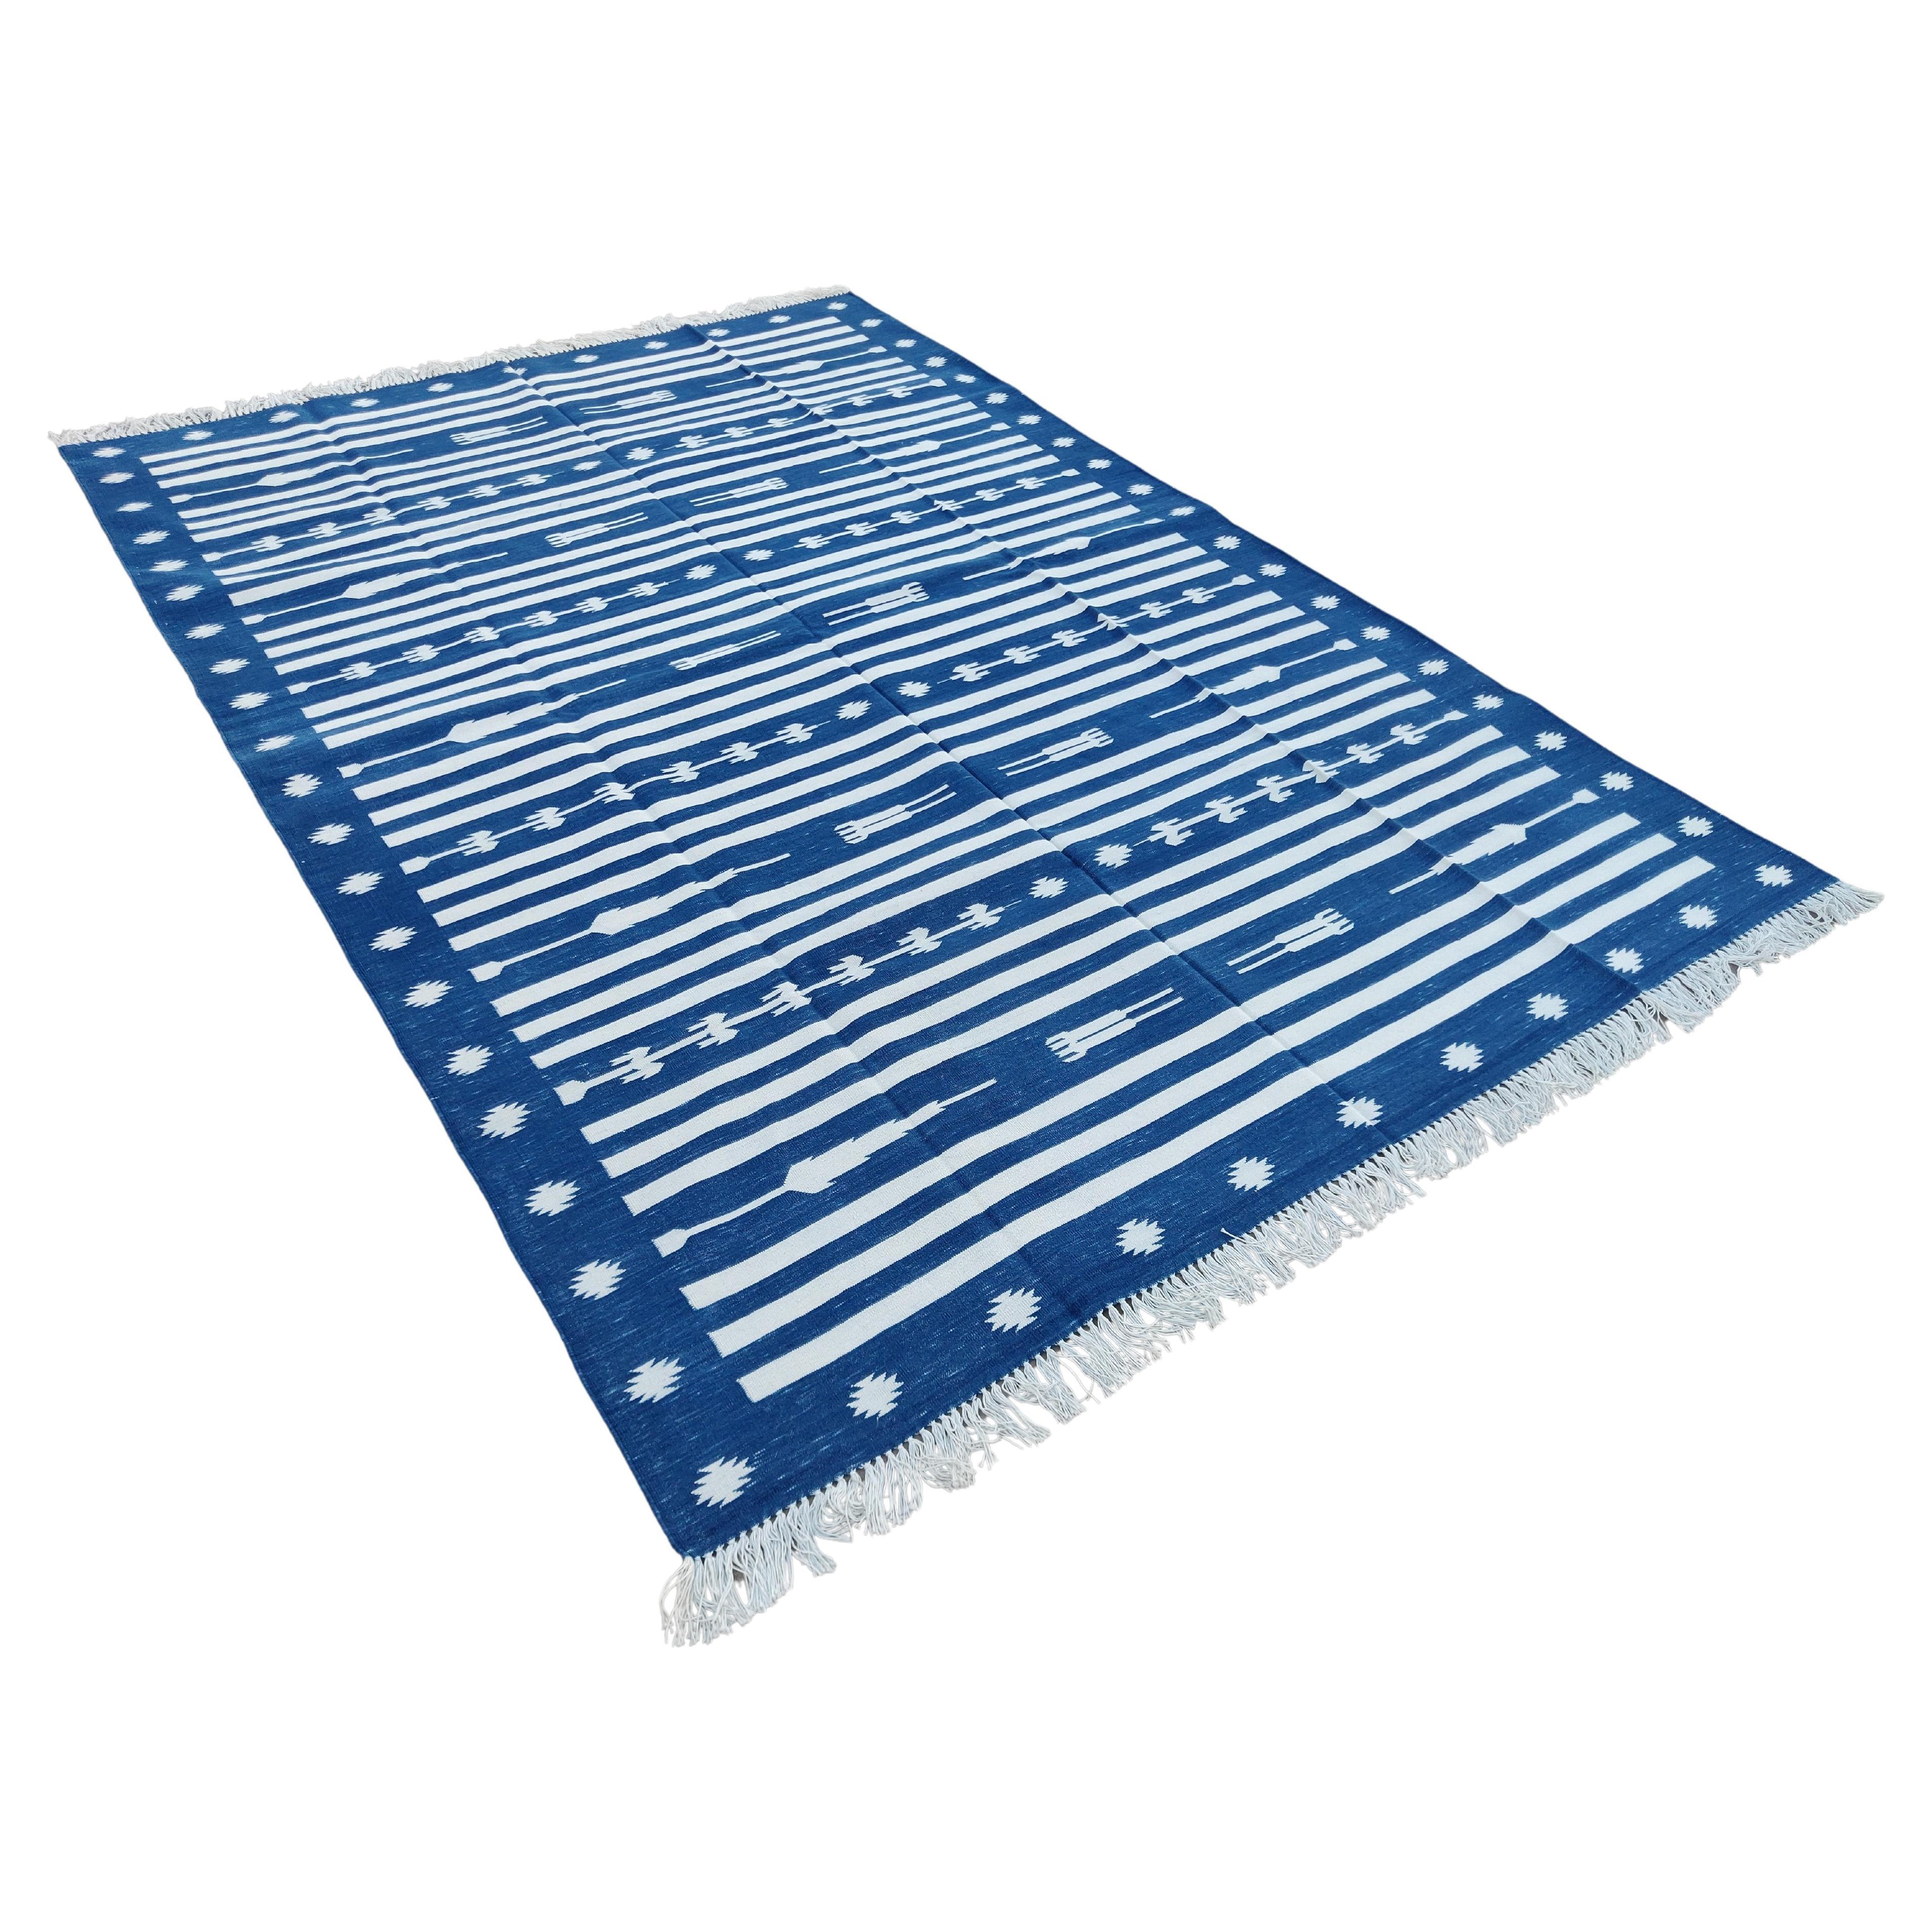 Handmade Cotton Area Flat Weave Rug, 6x9 Blue And White Striped Indian Dhurrie For Sale